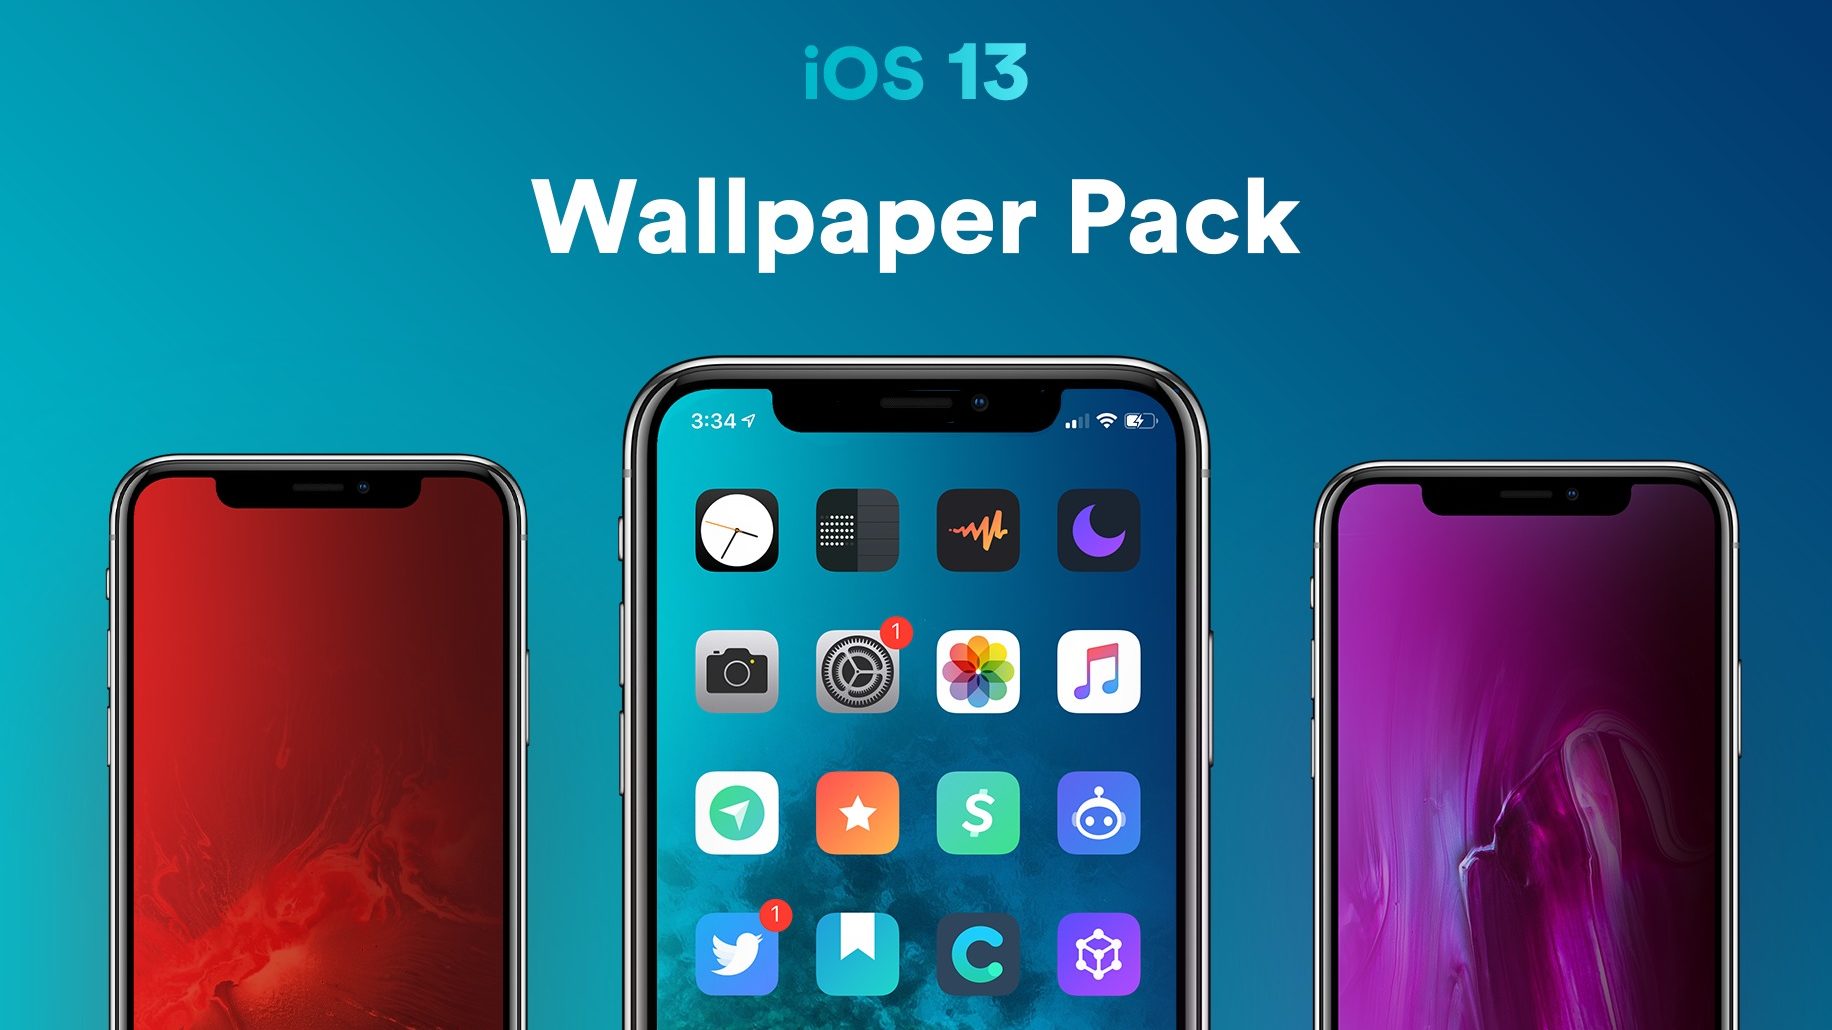 Apple iOS 13 wallpaper download now available for all